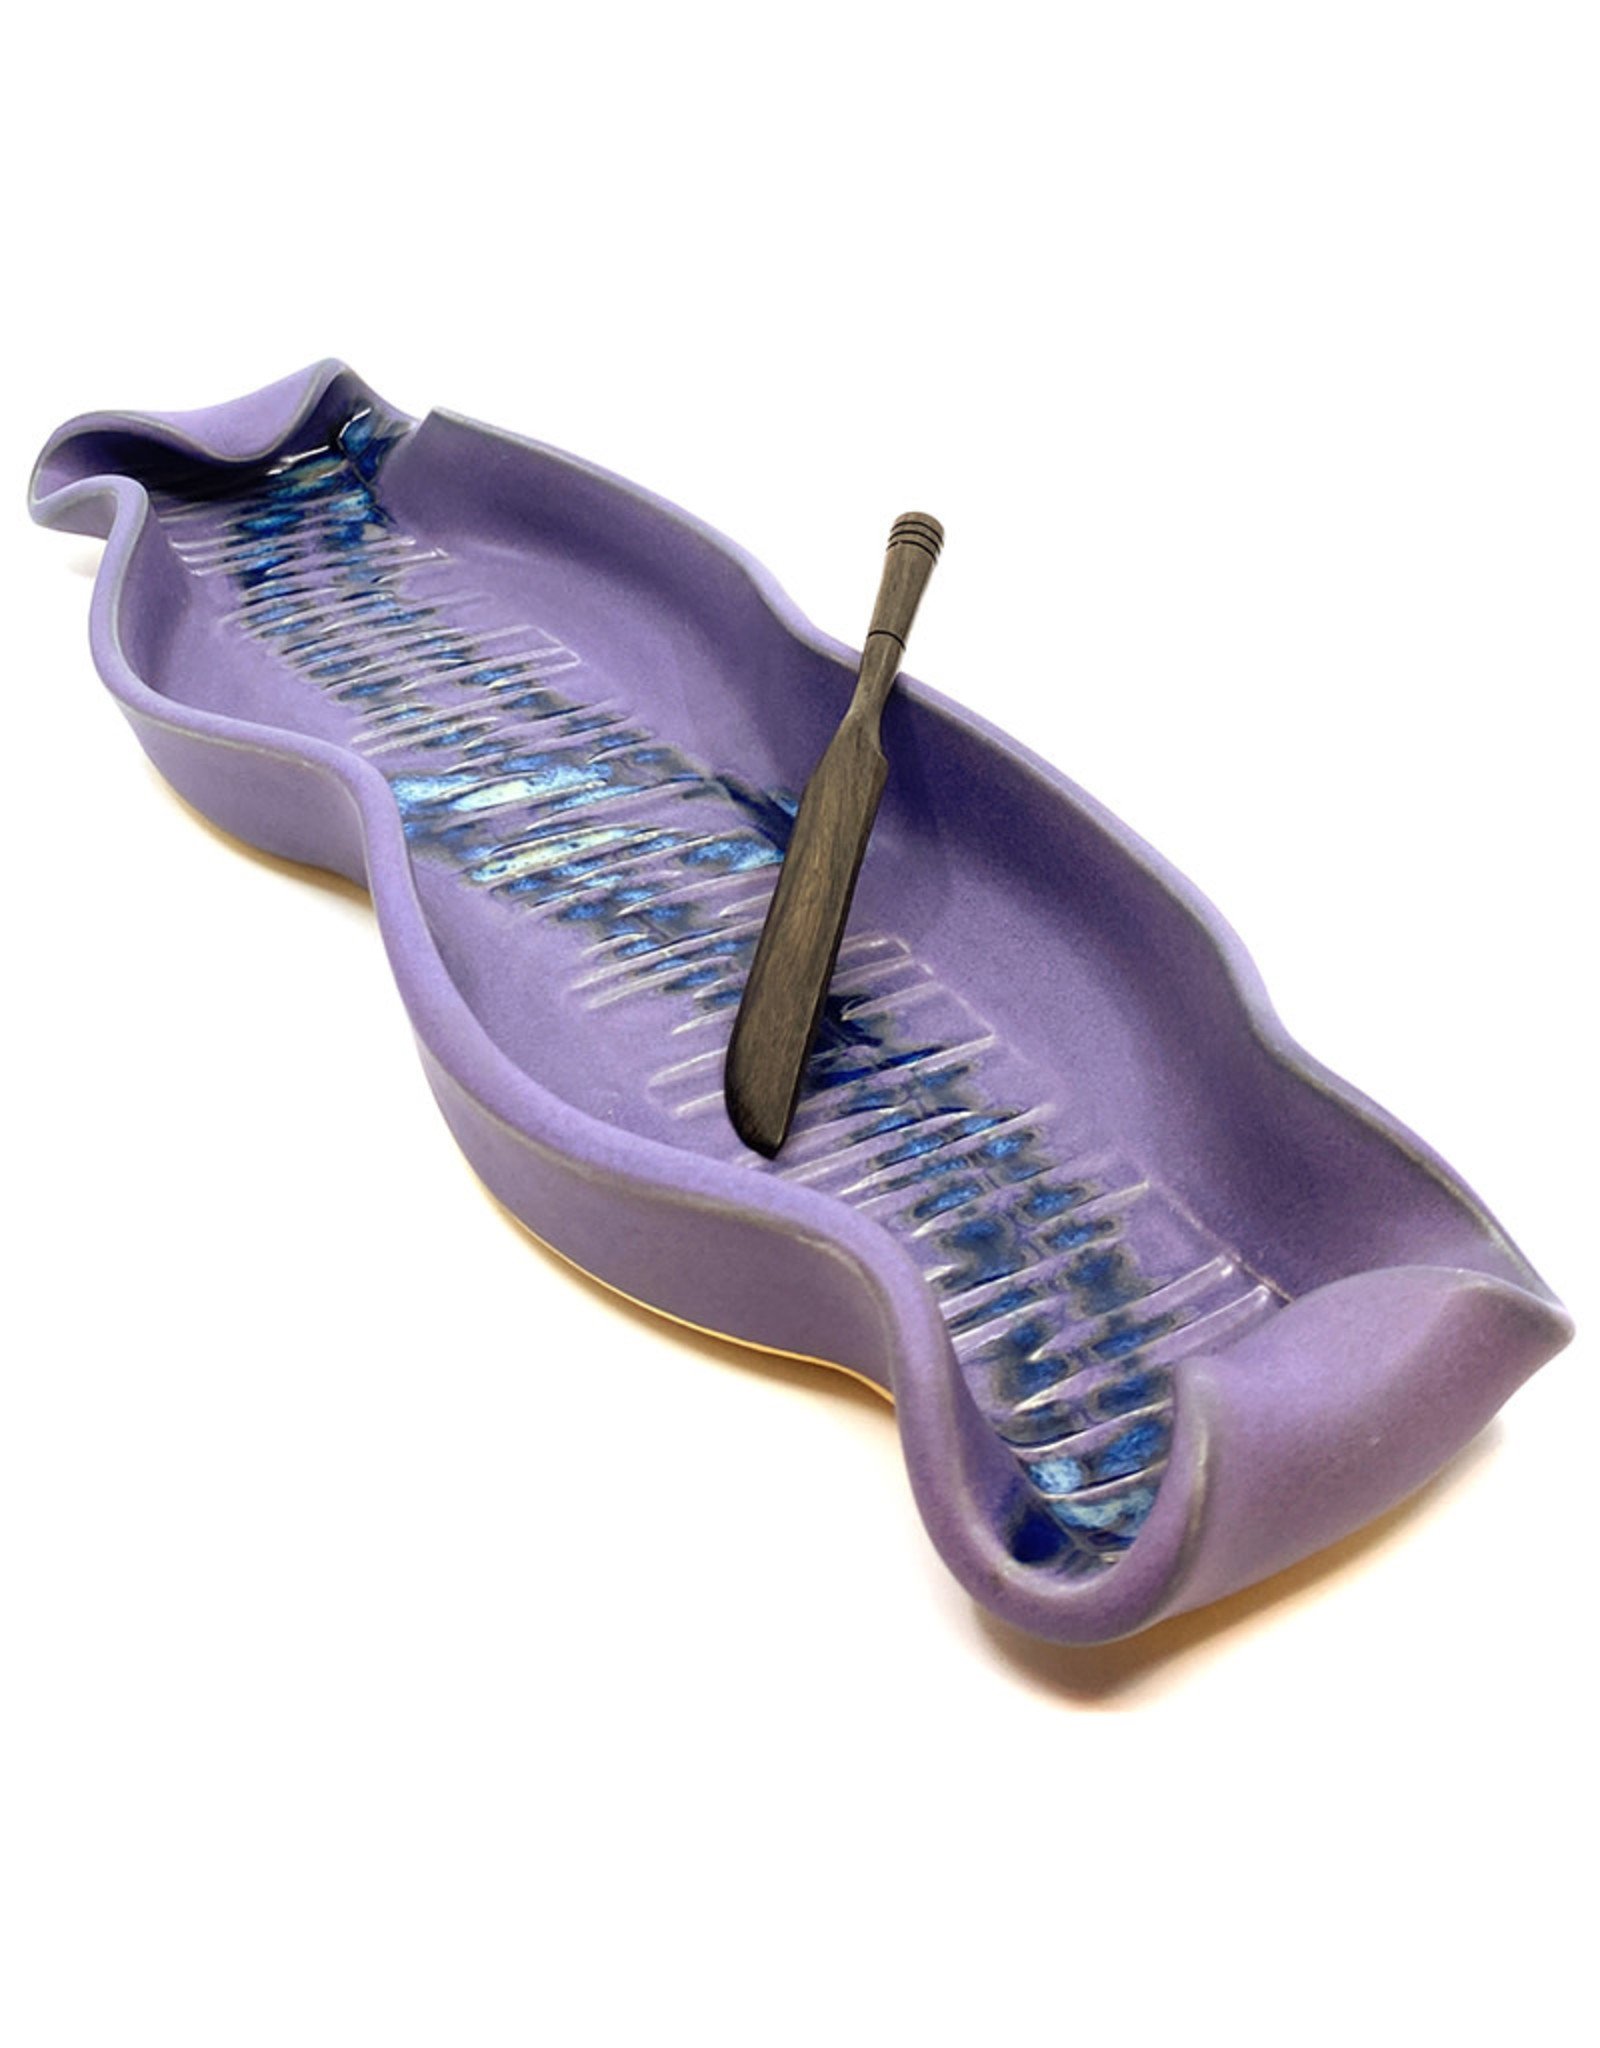 HILBORN POTTERY PERWINKLE BAGUETTE TRAY WITH SPREADER